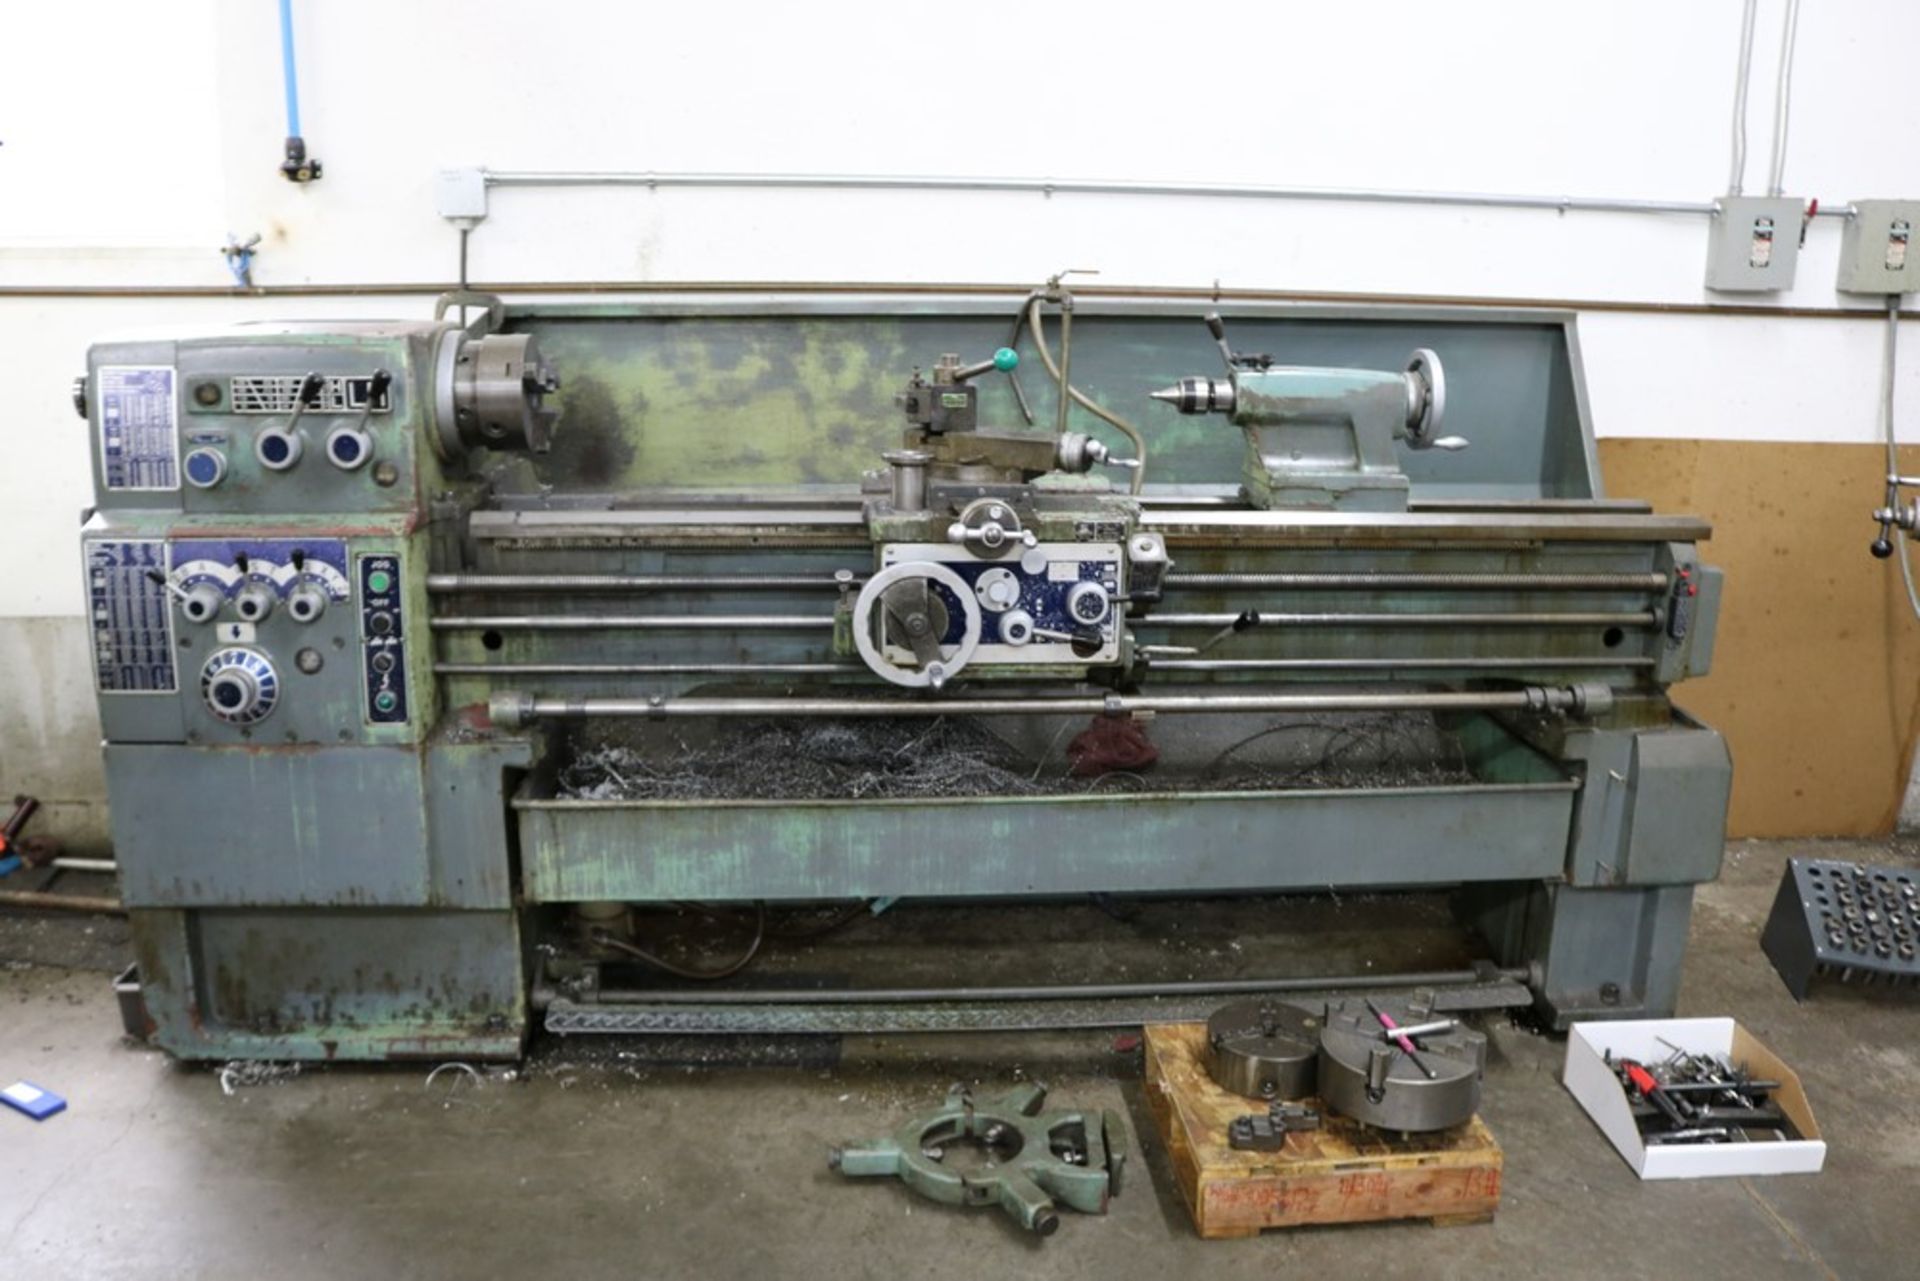 1986 Y.C.I Supermax Model LG1667, 8" 3 Jaw Chuck, Tailstock, 2 Post Tool Holder, 12 Max Swing,